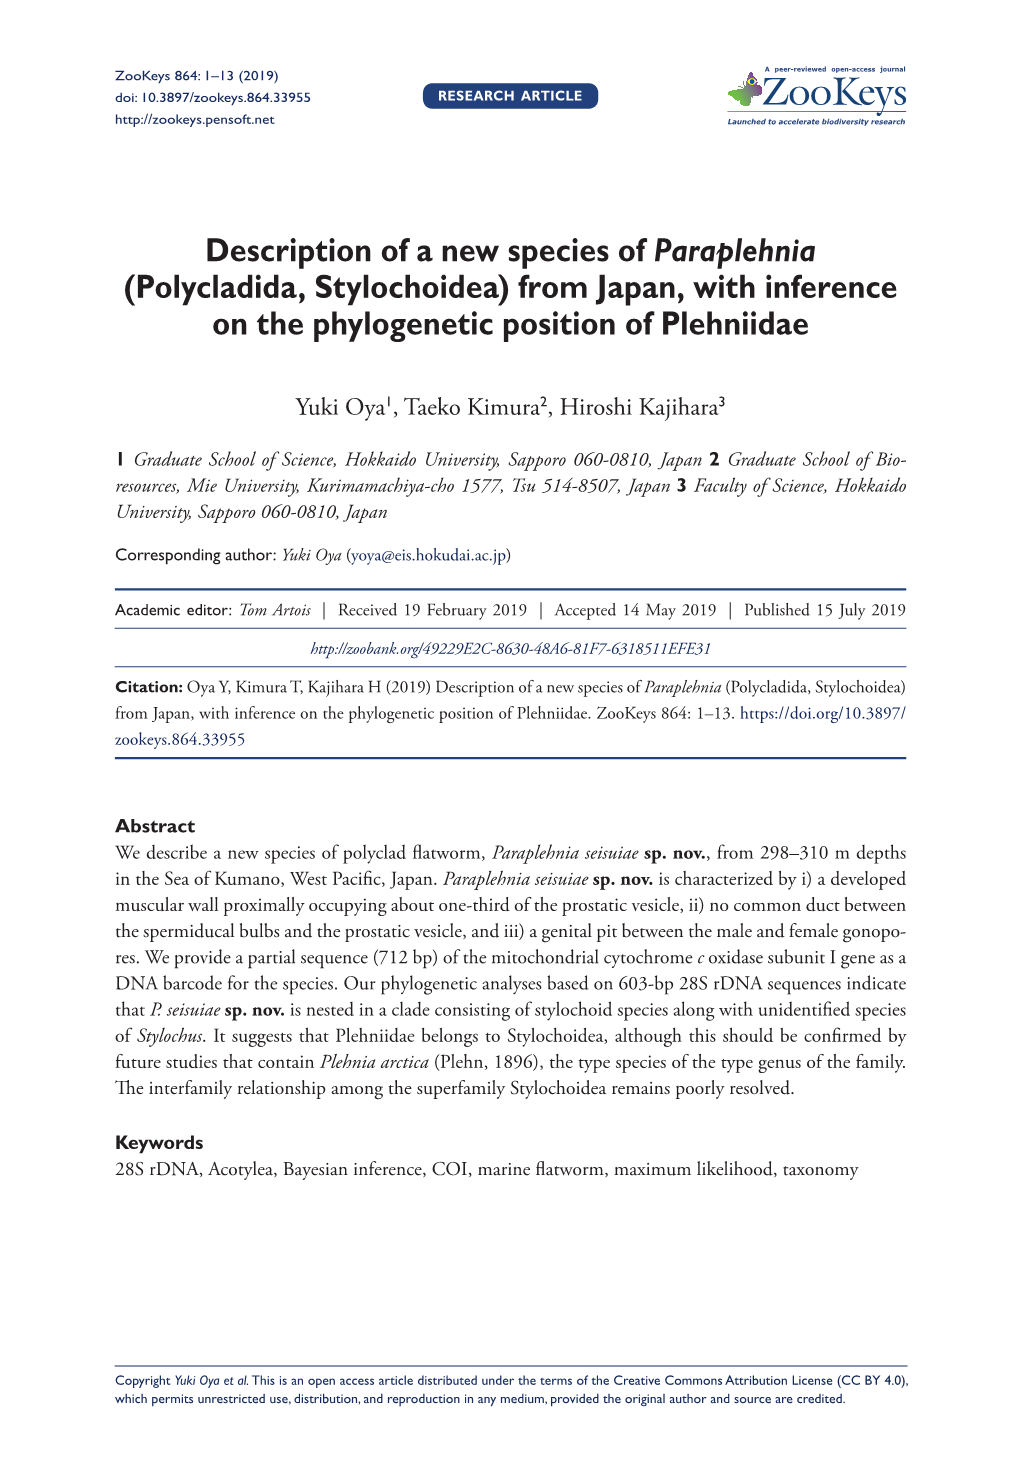 From Japan, with Inference on the Phylogenetic Position of Plehniidae